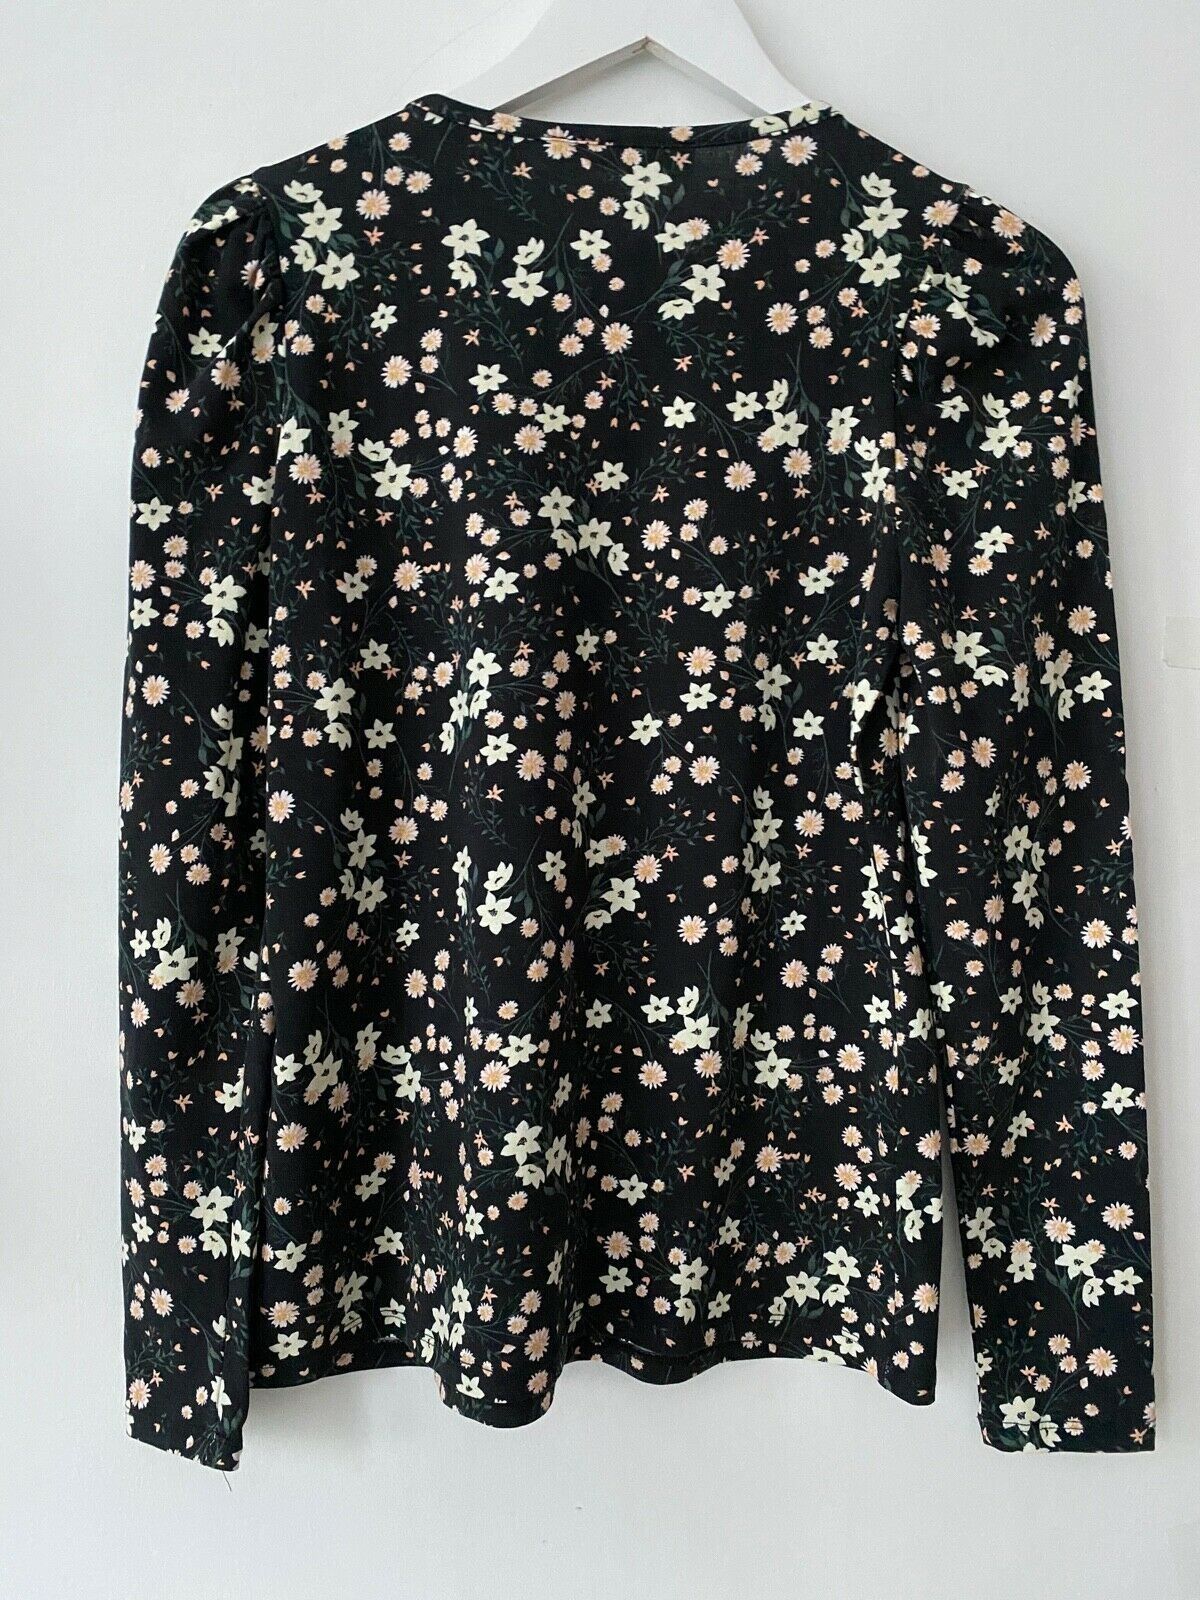 Very Ditsy Floral Long Sleeve T-Shirt Size 10 - Beagle Boutique Fashion Outlet